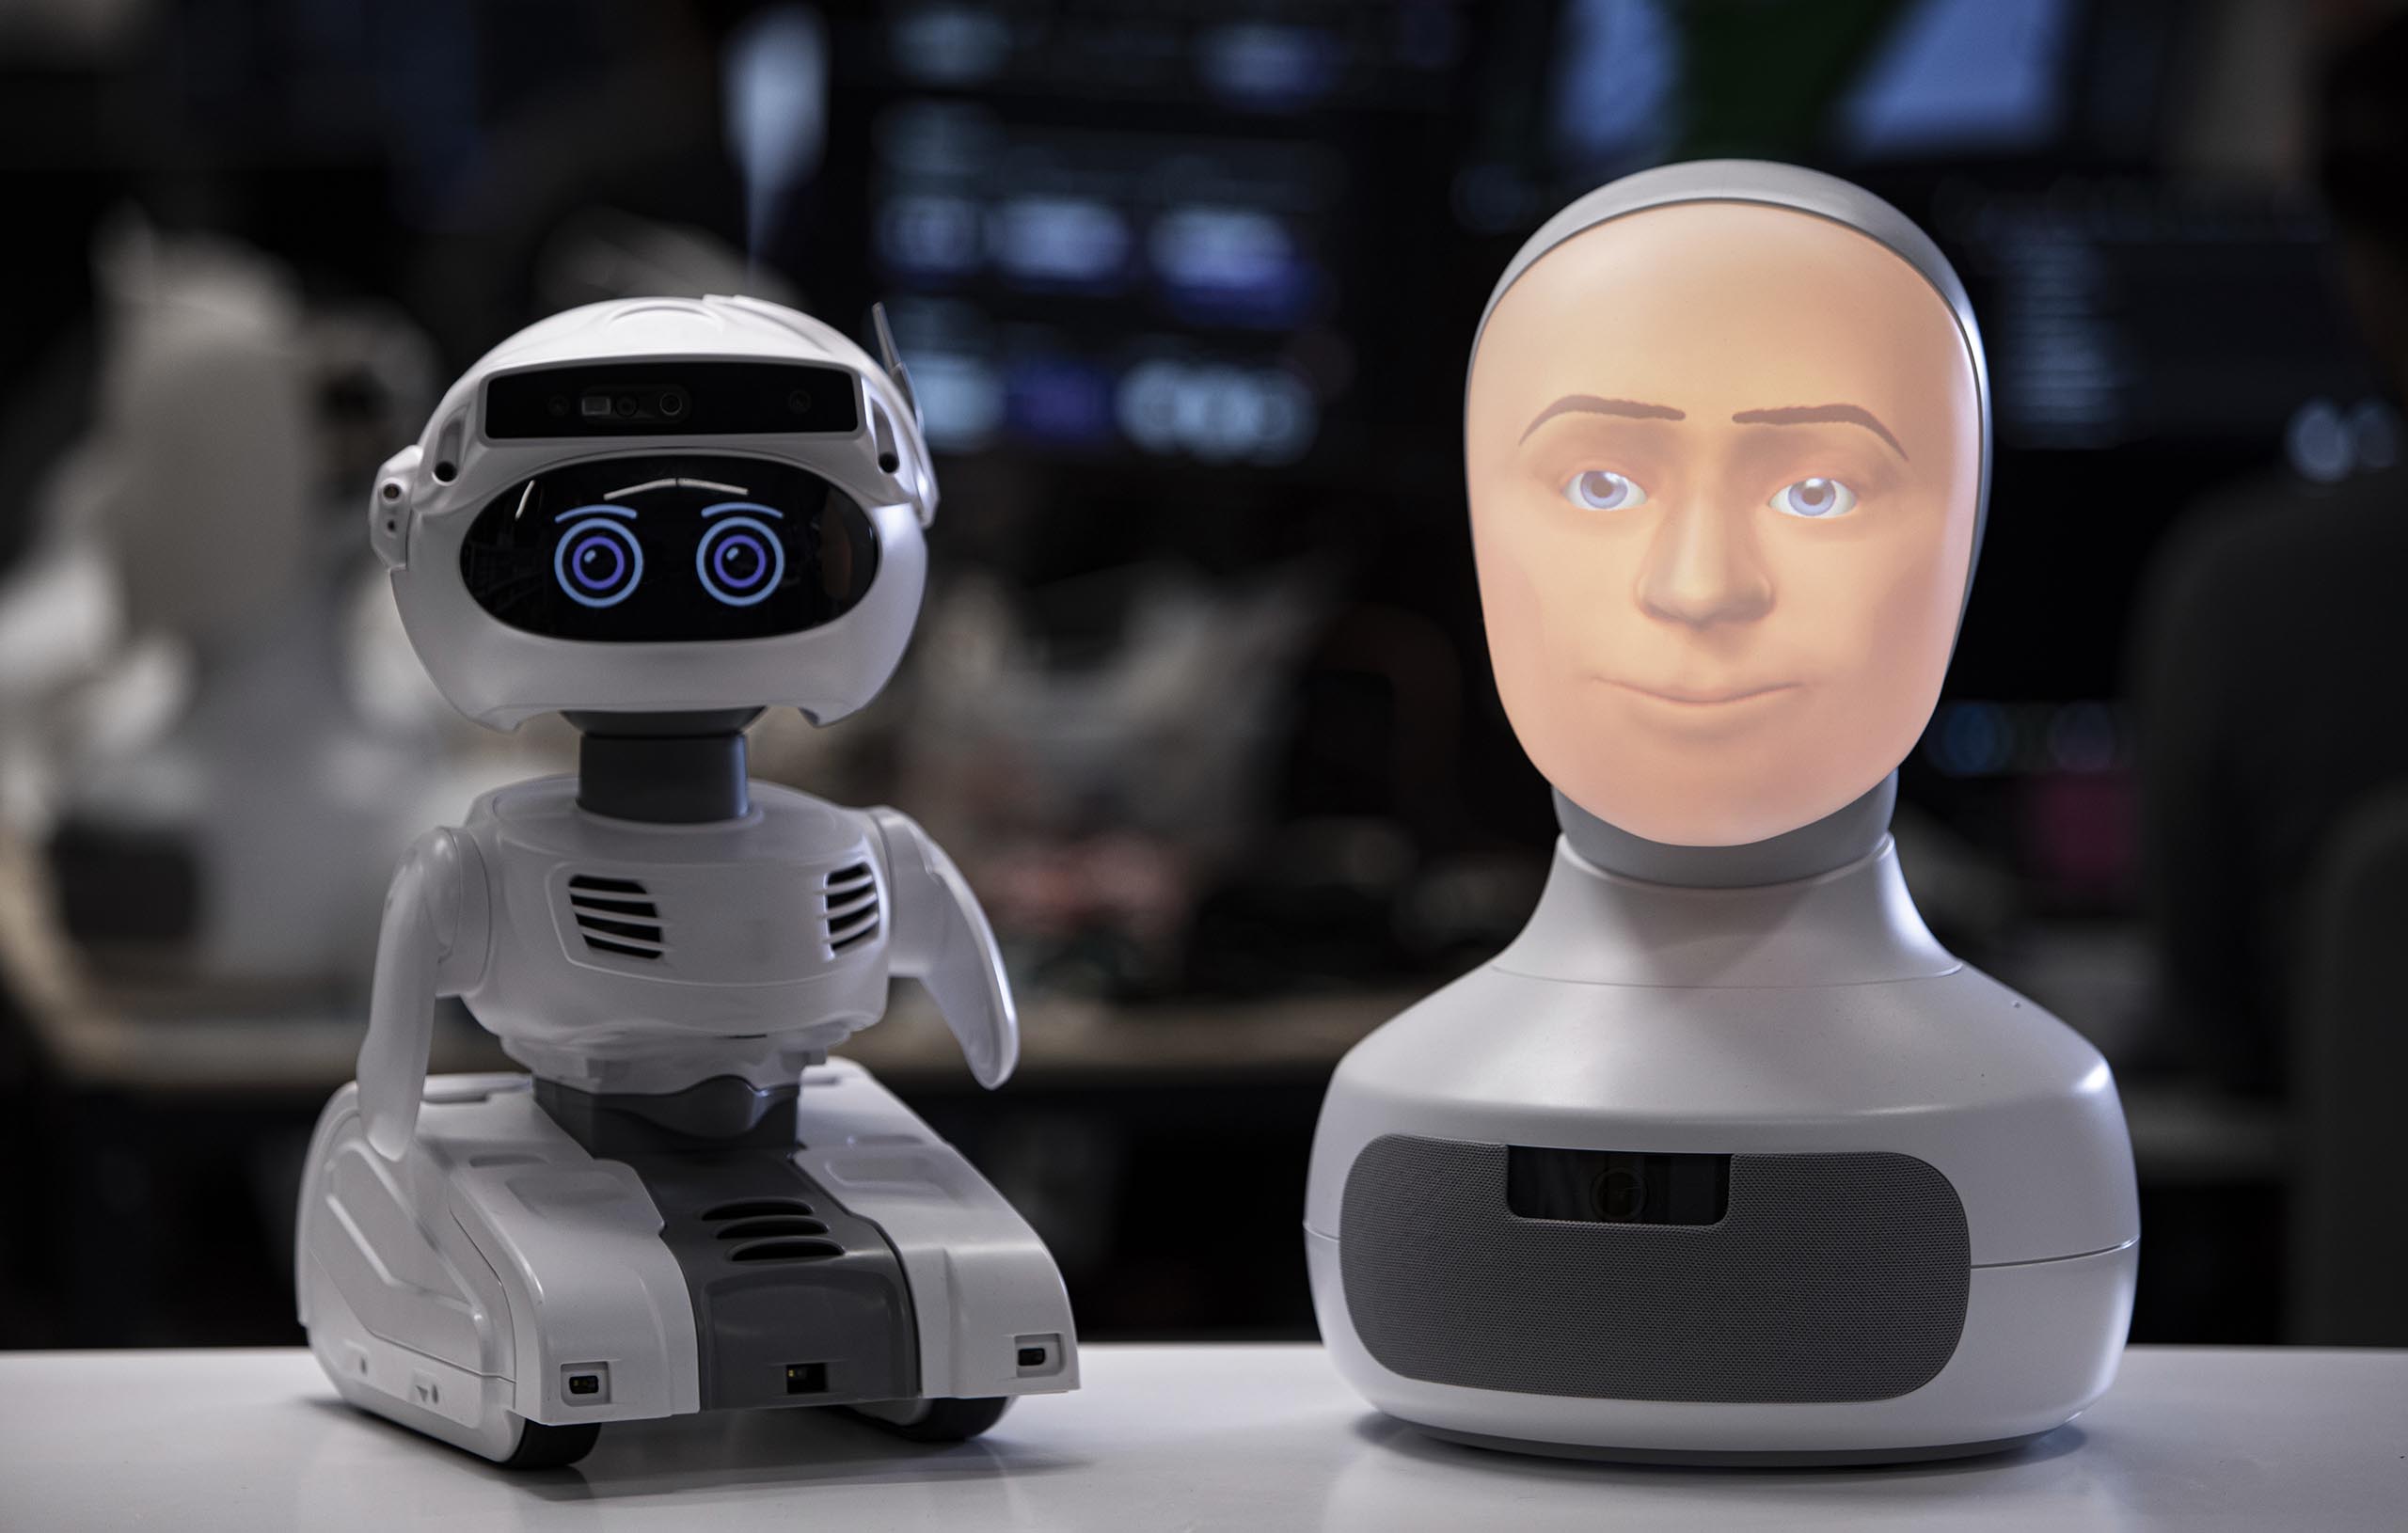 Furhat Robotics acquires the business assets of US-based Misty Robotics to accelerate the next generation of social robots